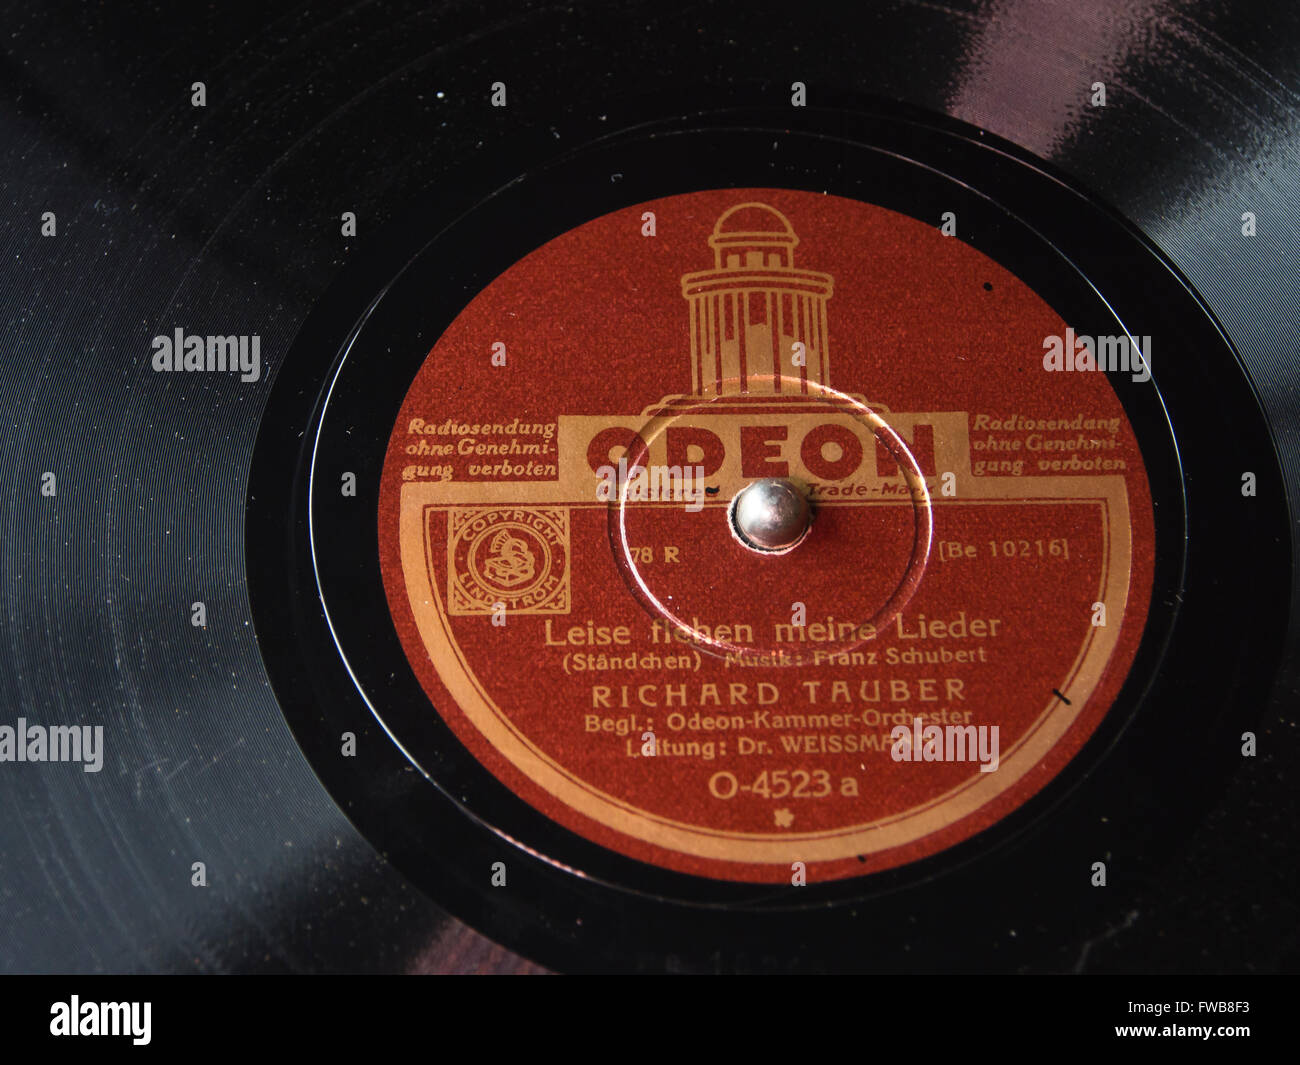 Vintage Odeon record label, 'Leise flehen meine Lieder' sung by the famous tenor Richard Tauber (ca 1925) Stock Photo